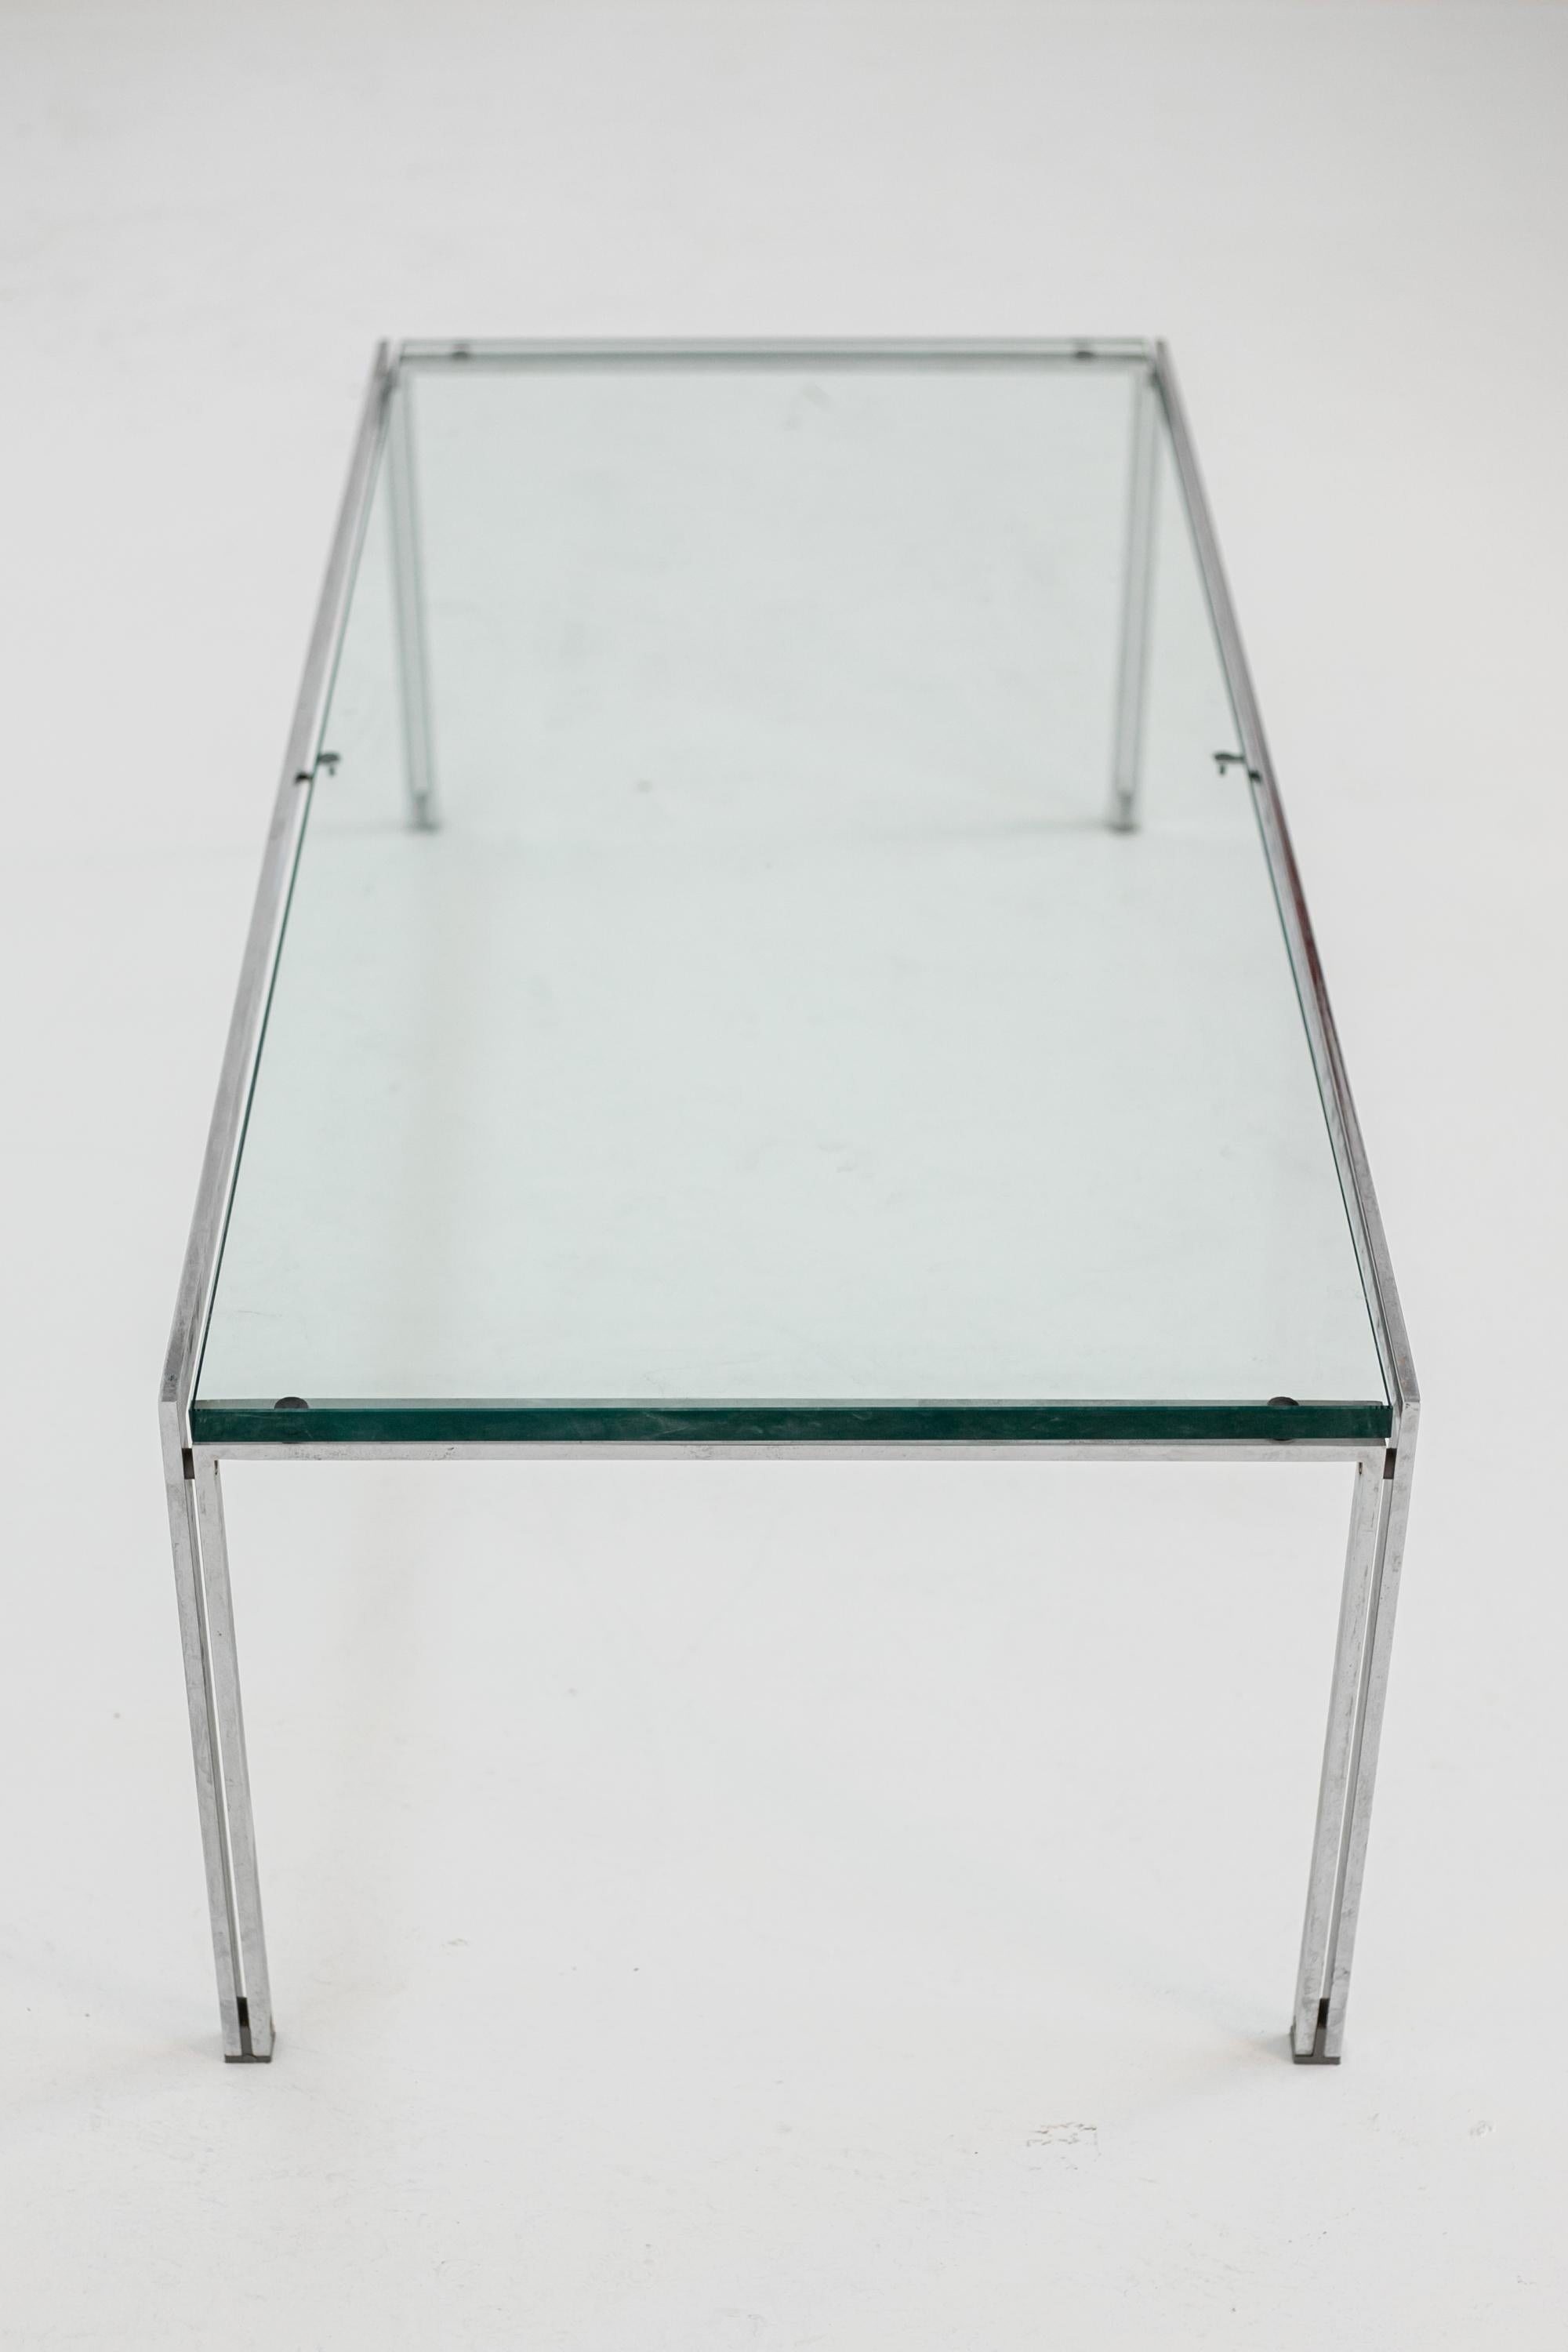 Low Living Room Table by Ross Littell for Depadova in Steel and Glass For Sale 3